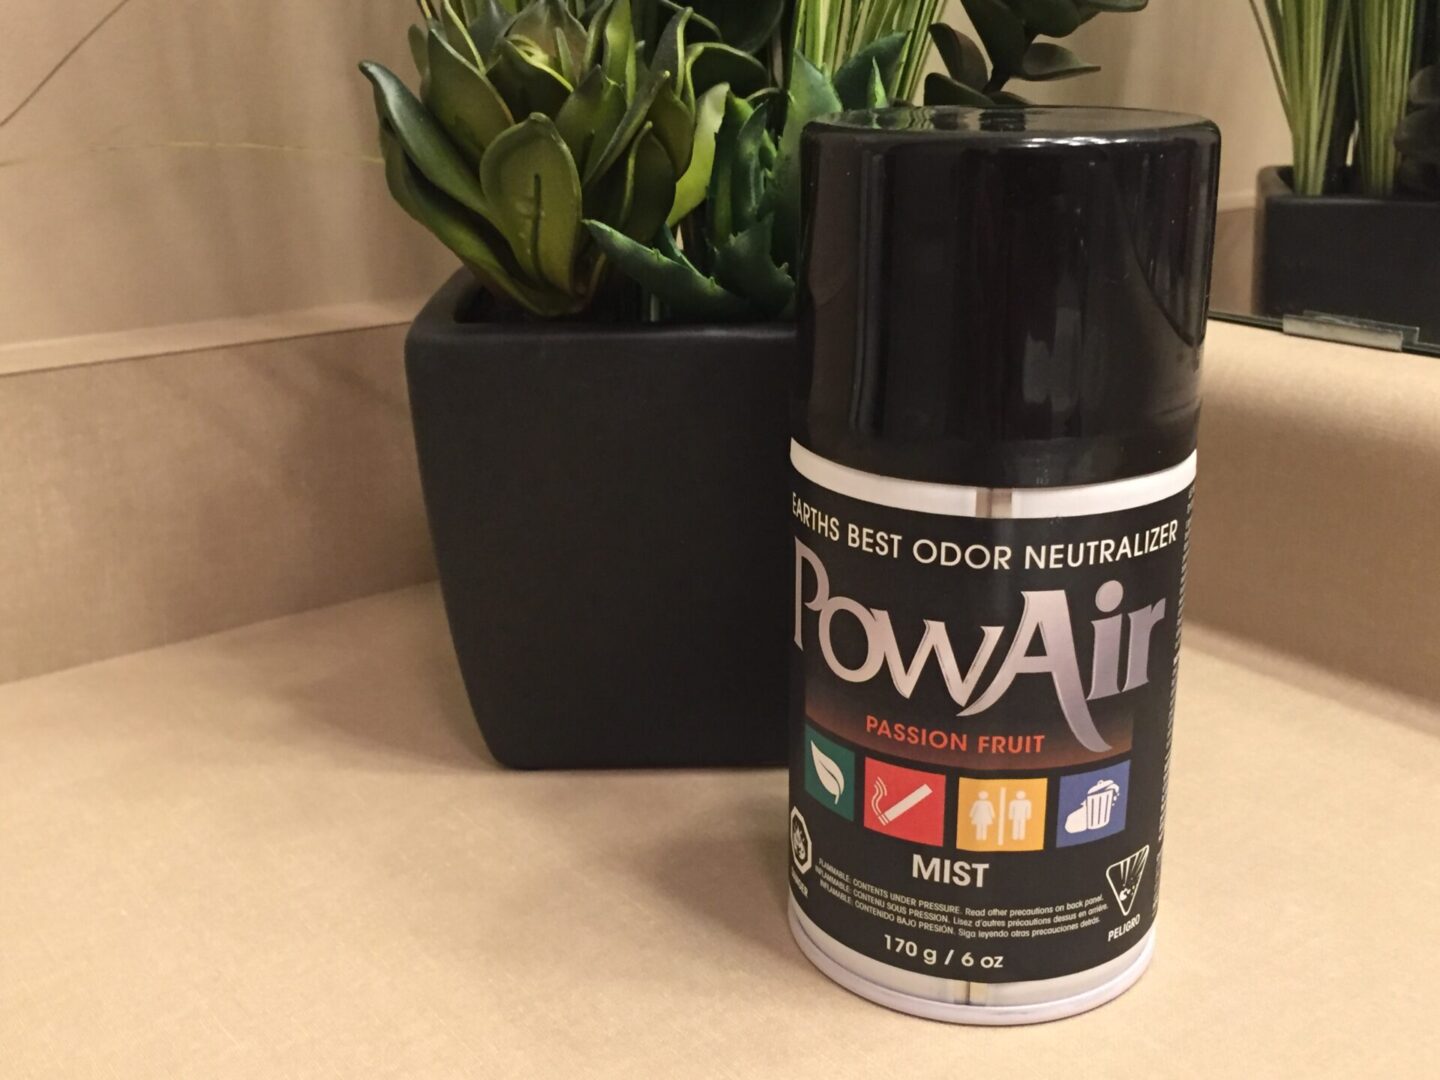 A can of powair on the table next to a plant.